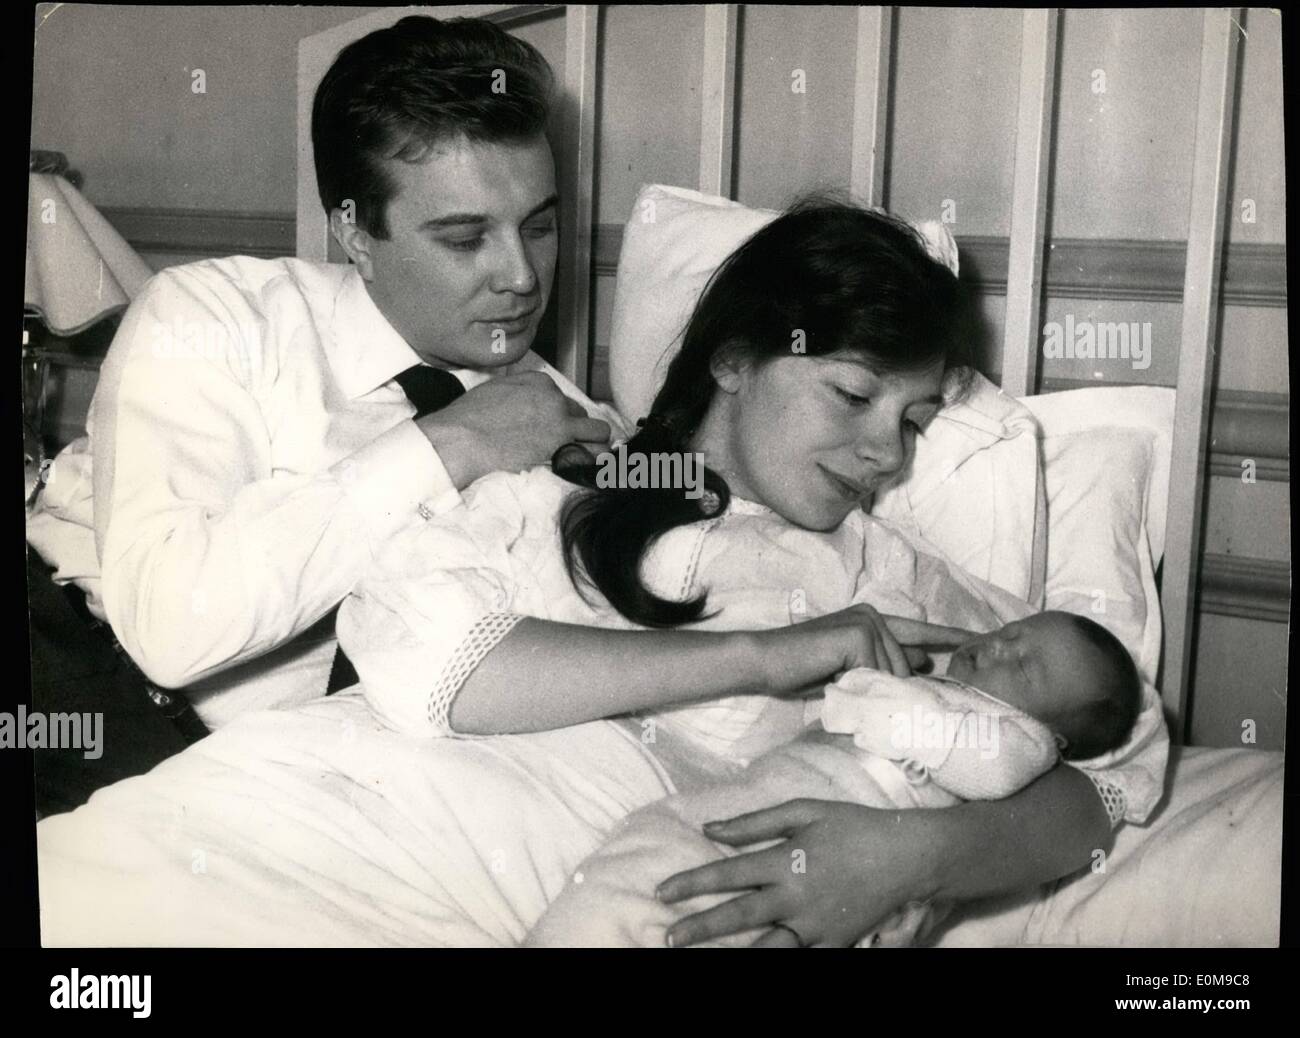 Mar. 03, 1954 - JULIETTE GRECO HAS A DAUGHTER. FAMOUS FRENCH SCREEN STAR (AND FORMERLY SAINT-GERMAIN DESPRES SINGER) JULIETTE GRECO IS THE HAPPY MOTHER OF THE SIX-DAY-OLD BABY DAUGHTER LAUNRENCE-MARIE. THE FATHER, SCREEN AND STAGE ACTOR PHILIPPE LEMAIRE, LOOKS ON TENDERLY. Stock Photo